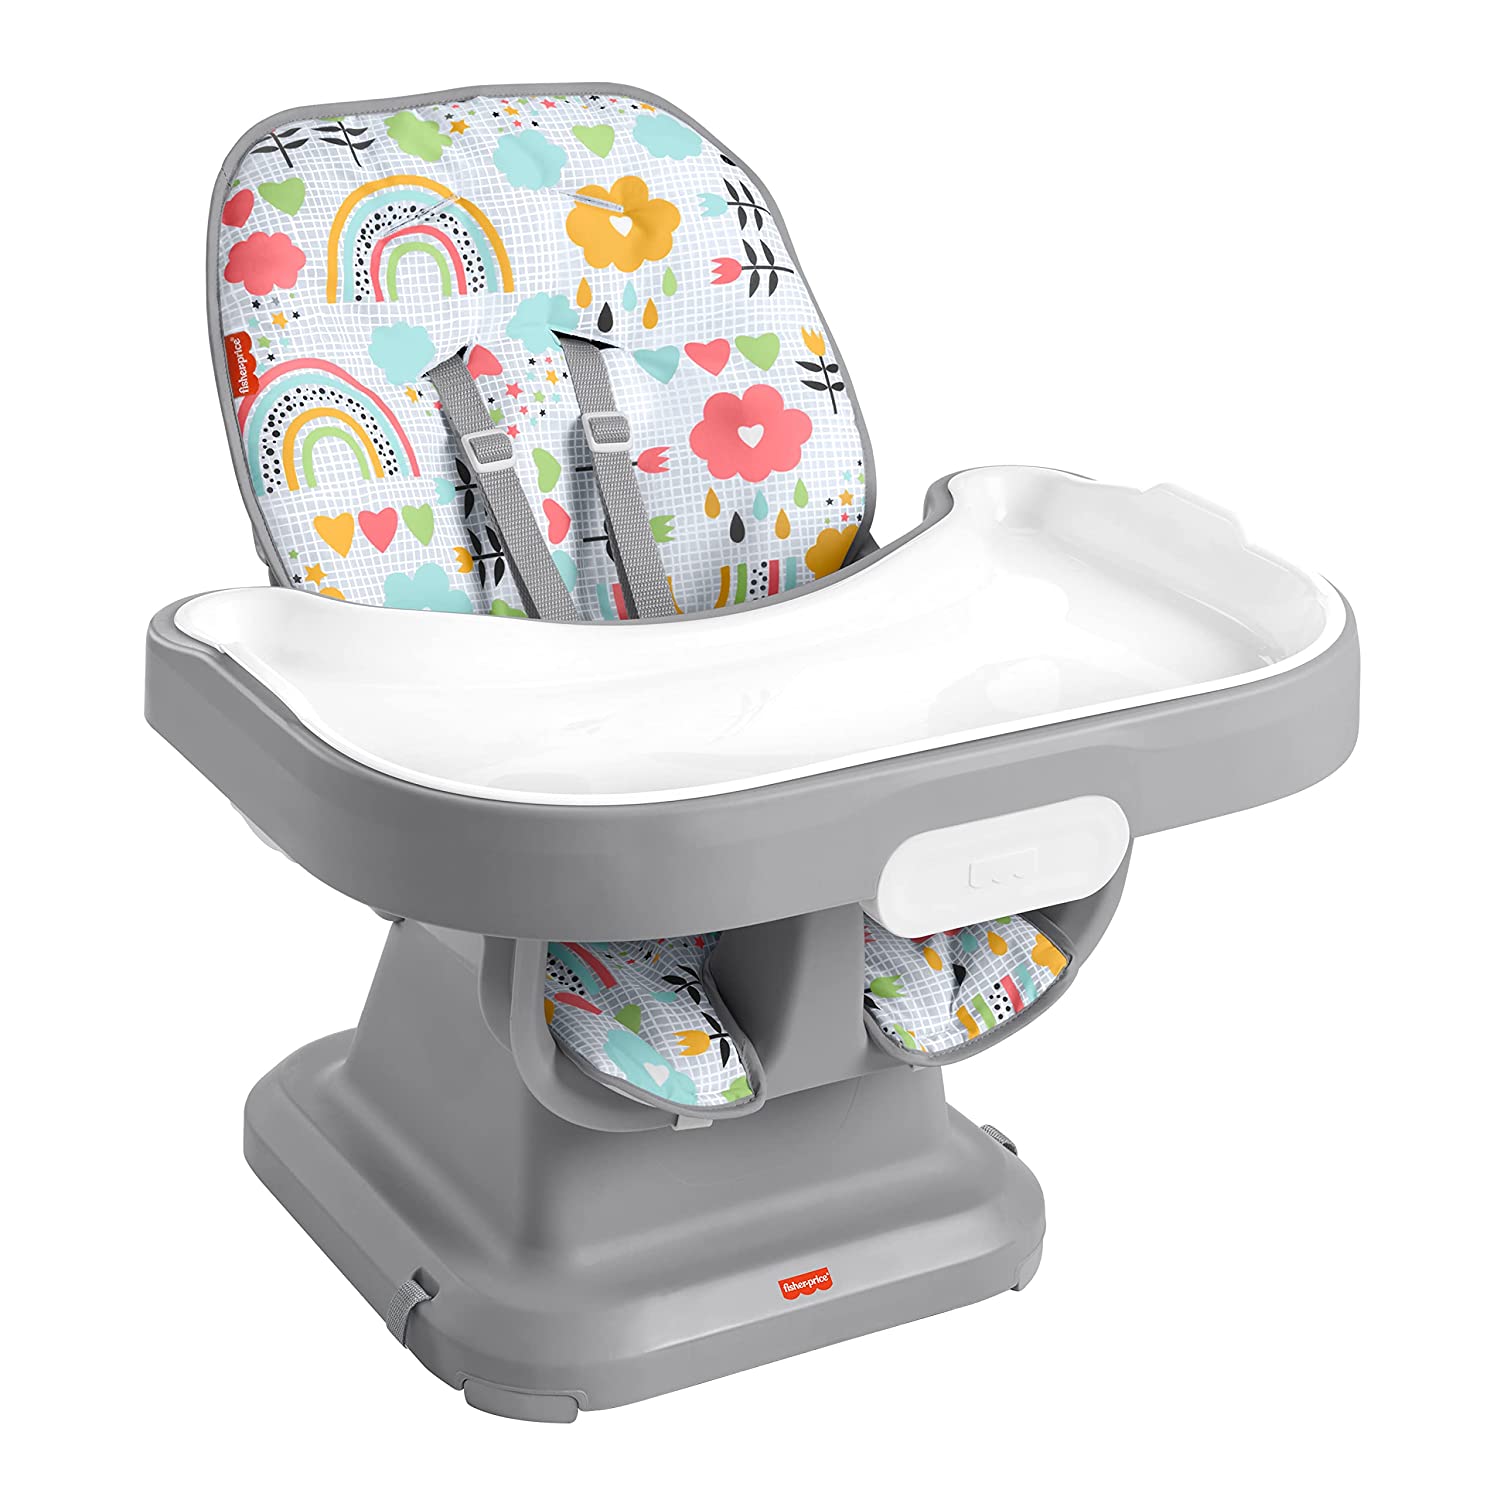 Fisher-Price SpaceSaver Simple Clean High Chair, Sun Showers - Portable for Baby-to-Toddler Dining Chair